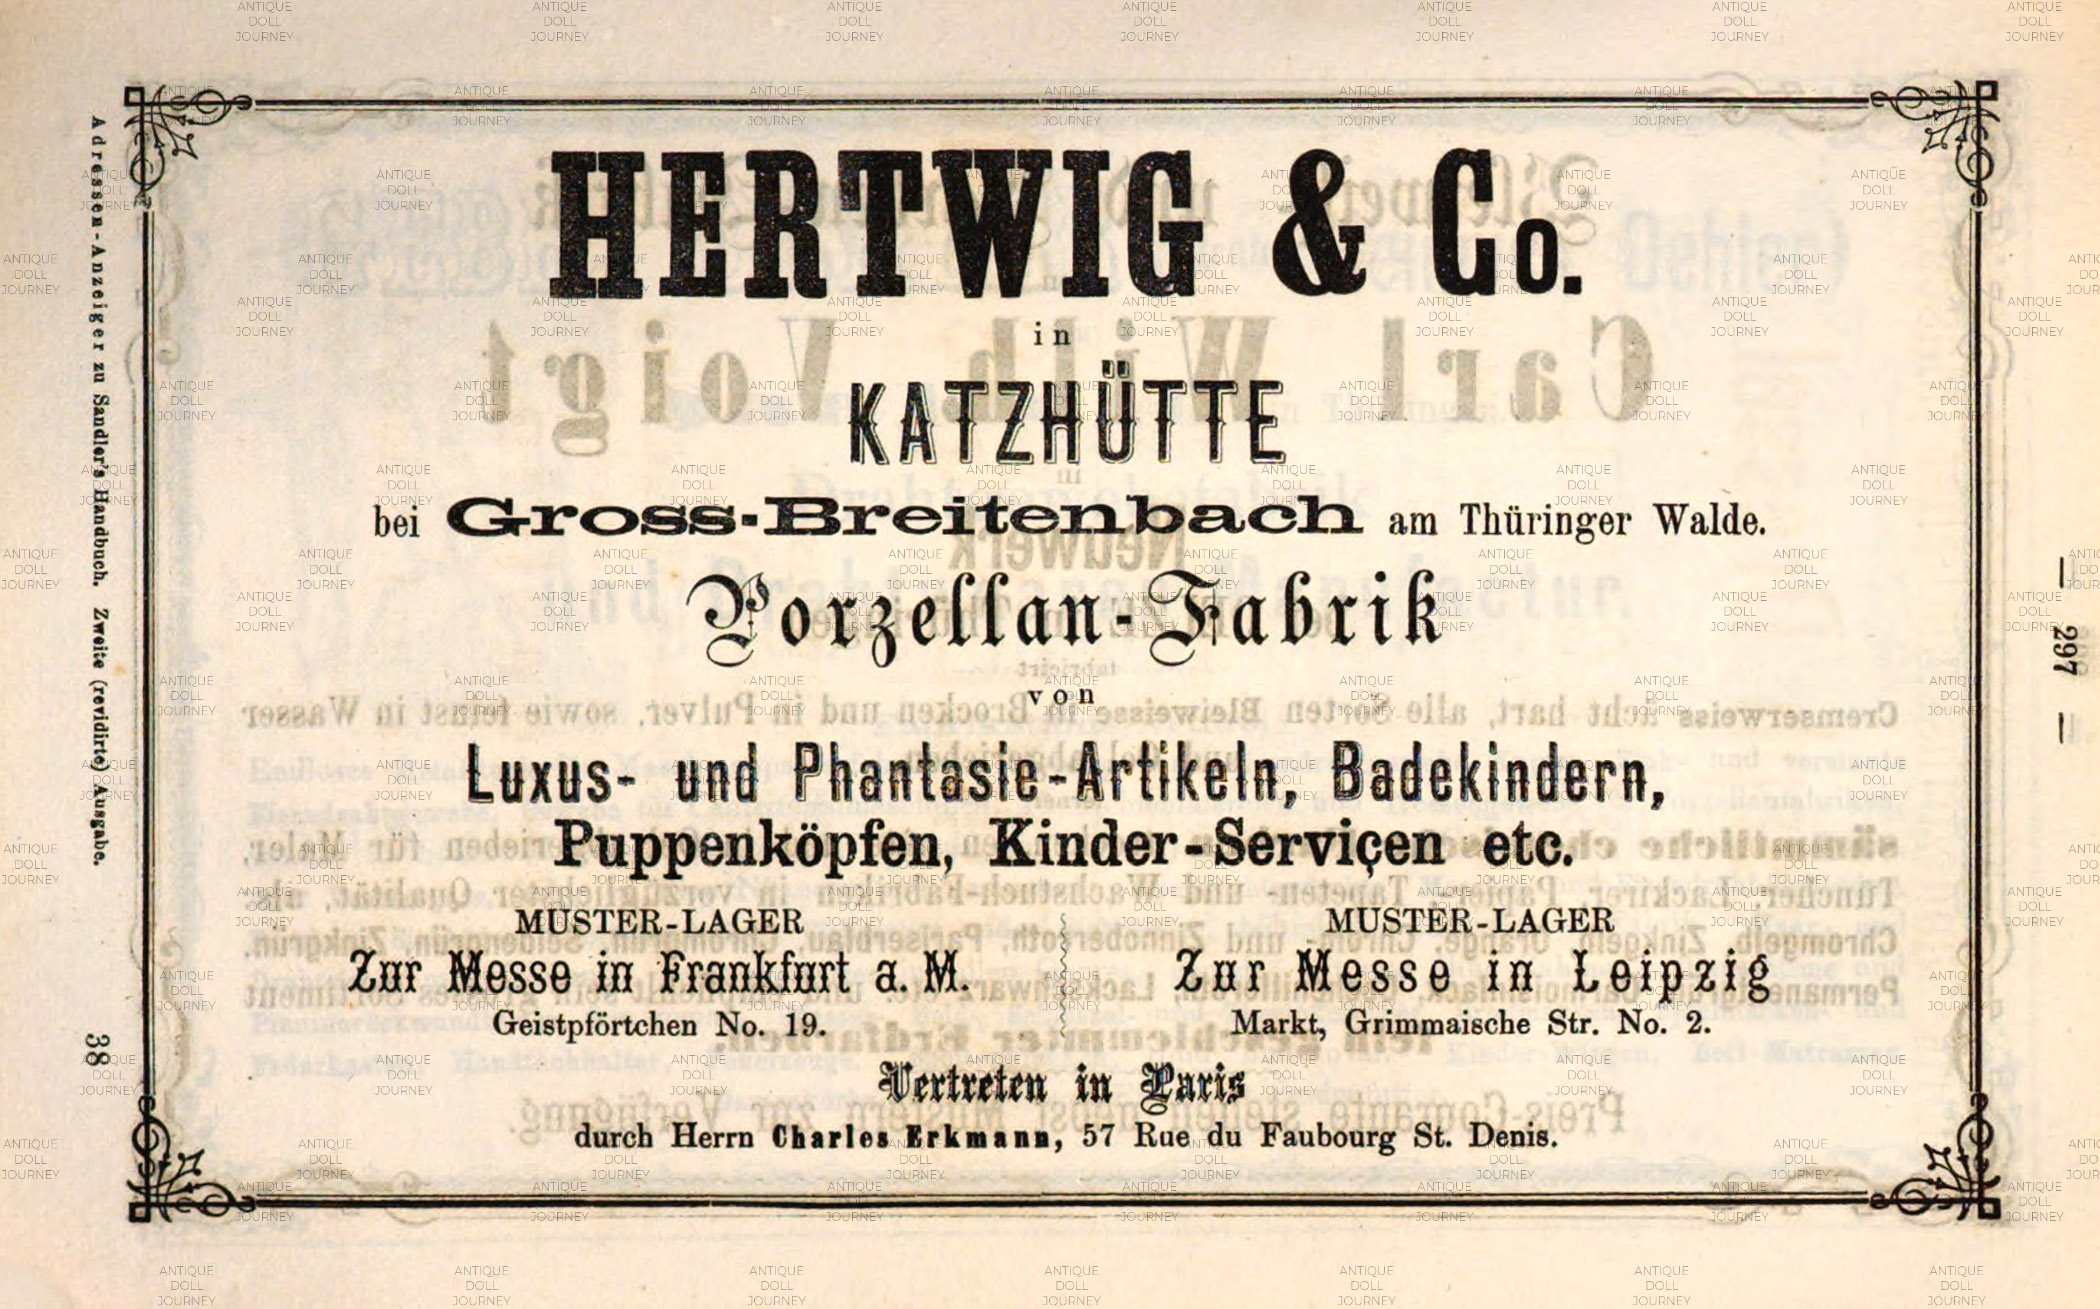 German ad for Hertwig & Co. porcelain factory from 1873